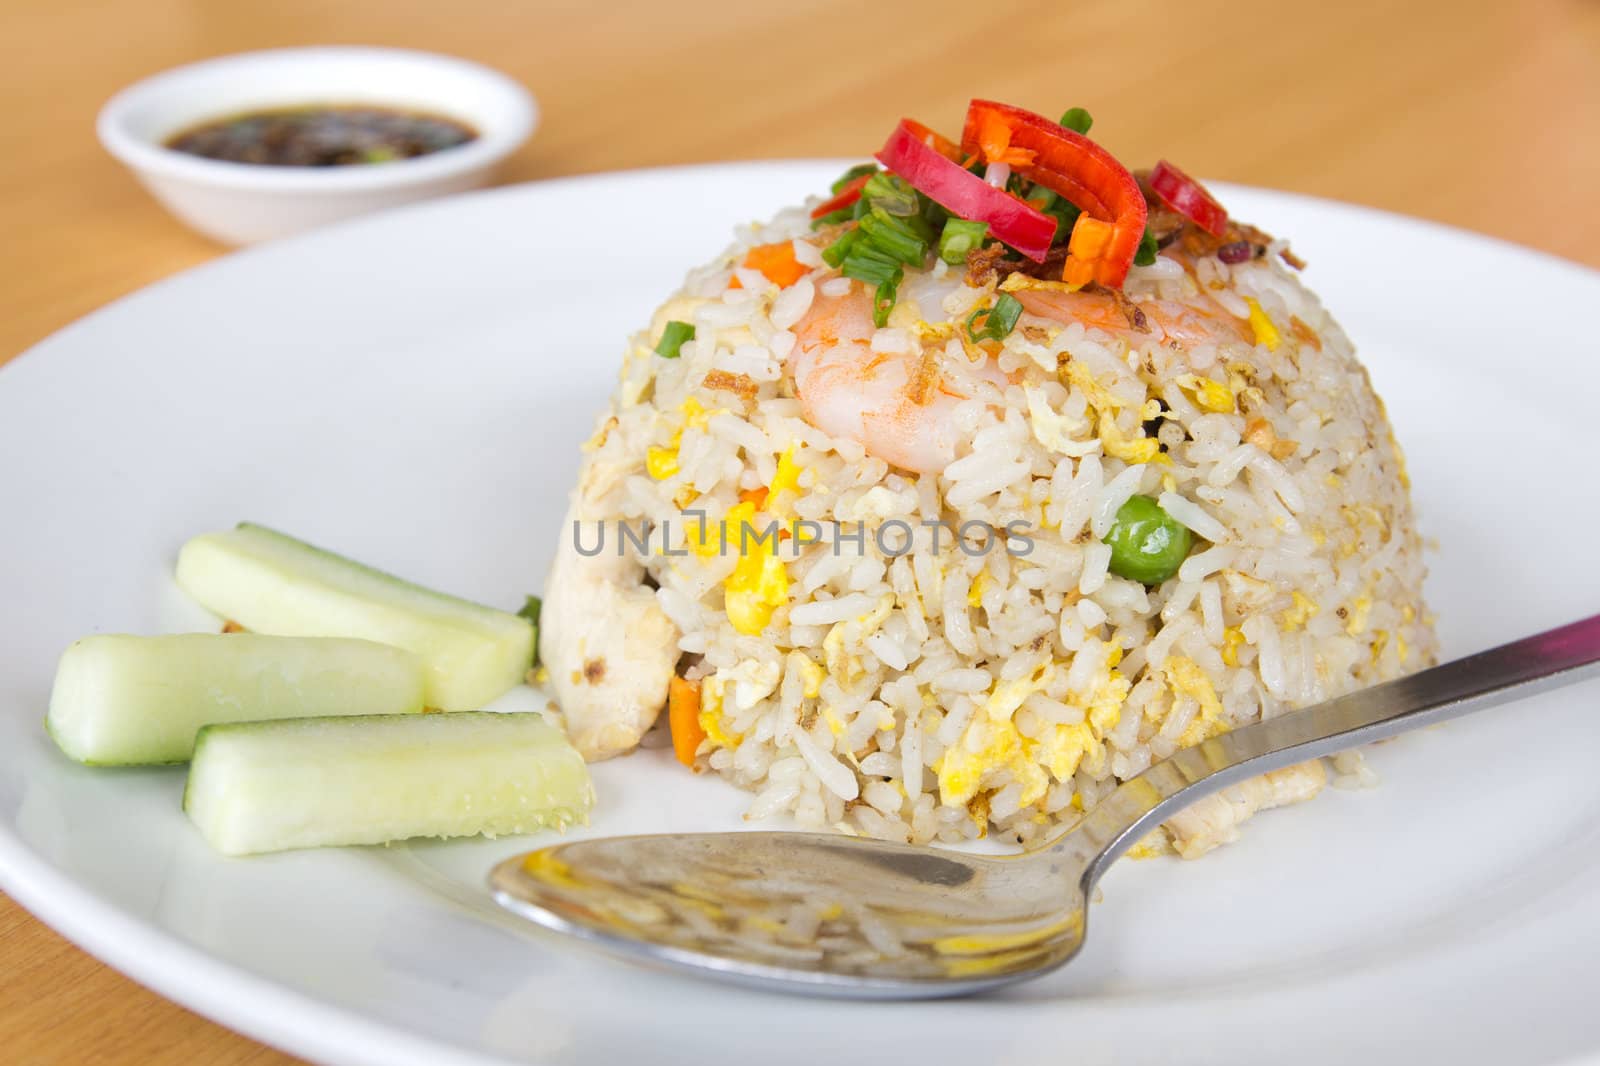 Plate of oriental fried rice with shrimp, chicken and egg